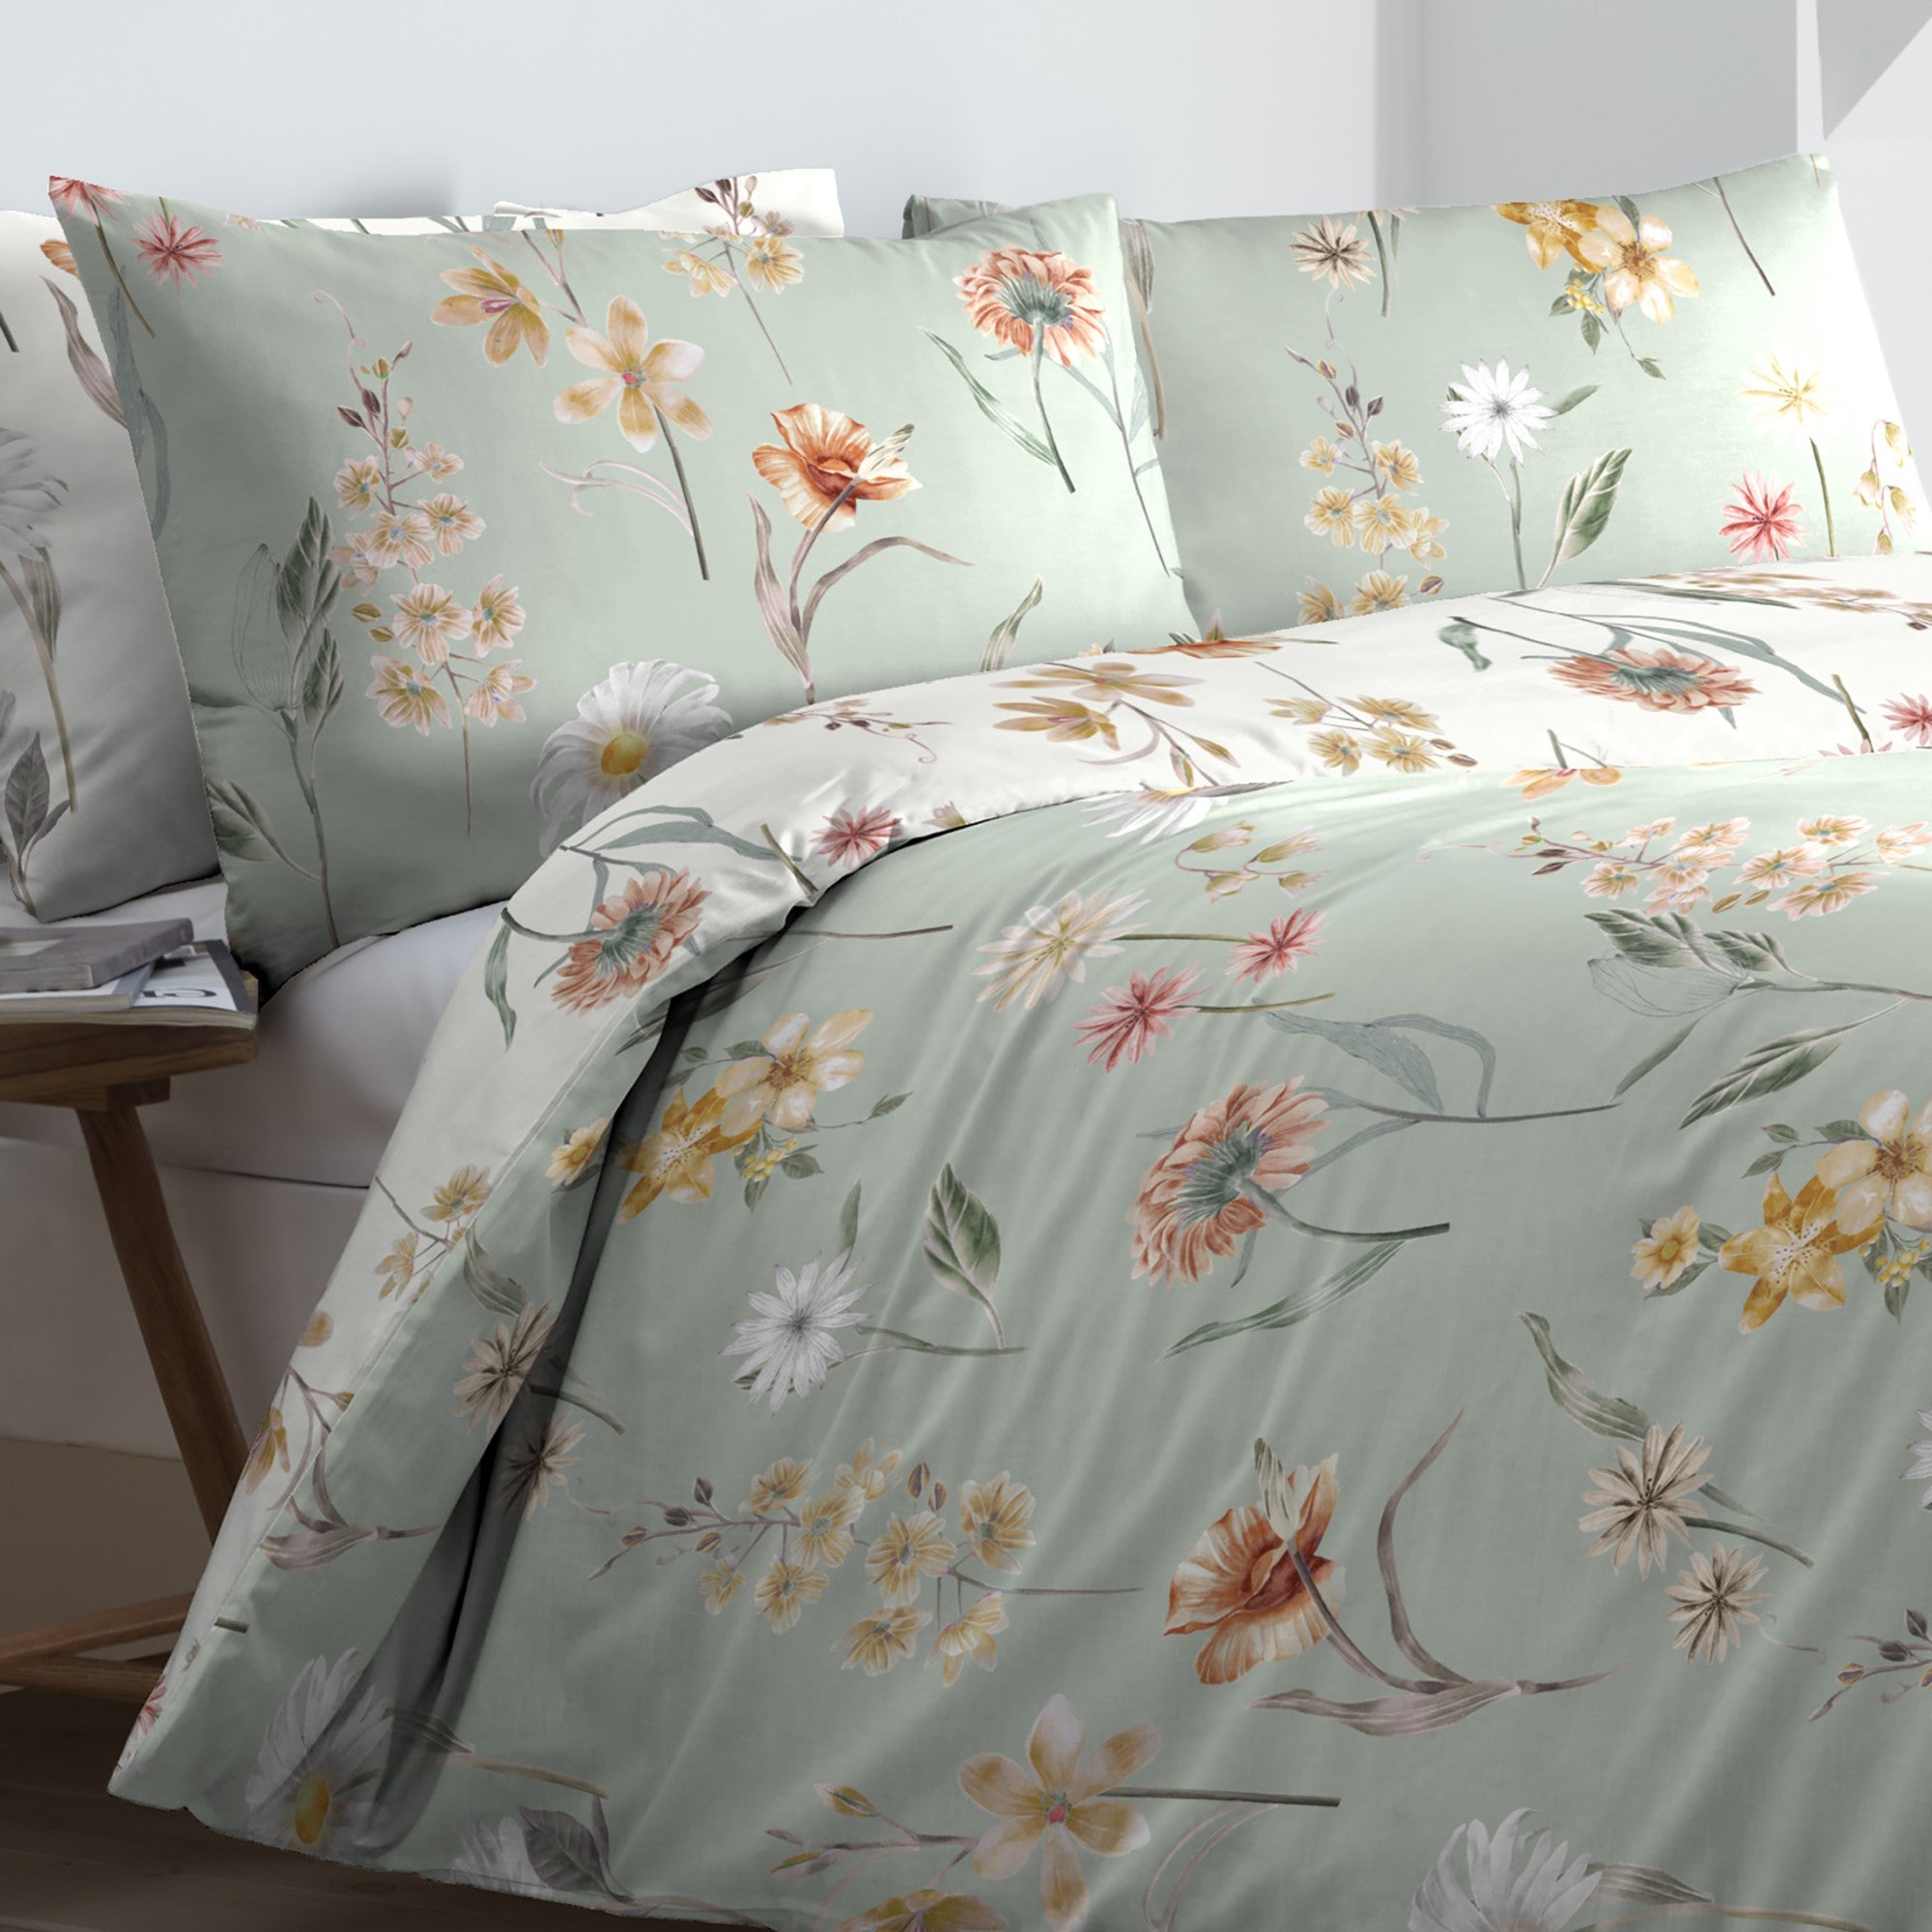 Duvet Cover Set Verity by Appletree Promo in Green